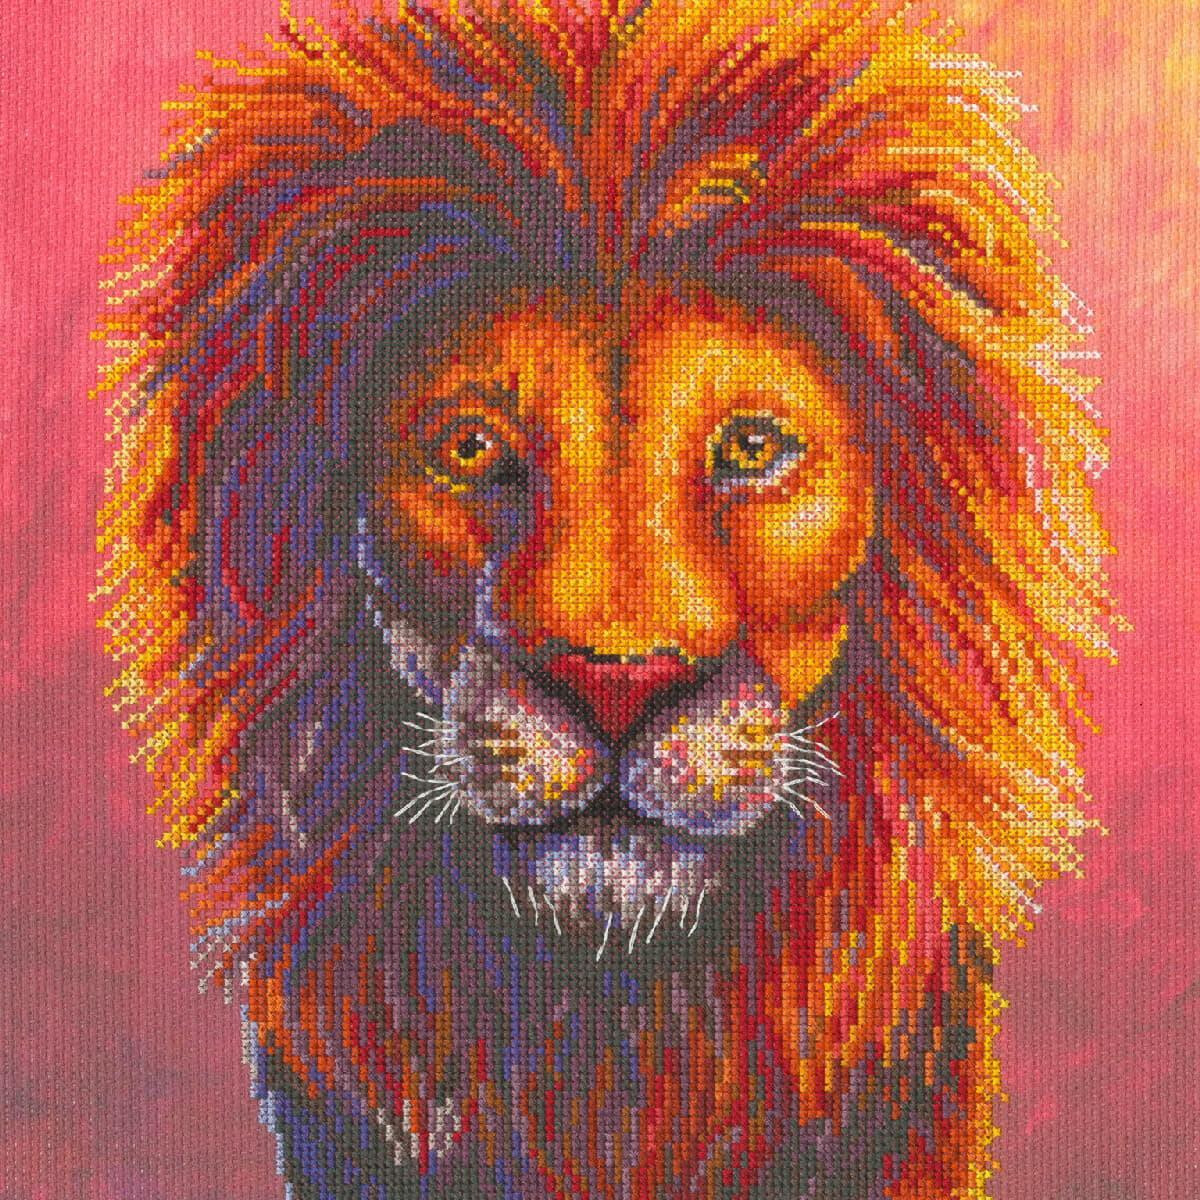 A vibrant mosaic artwork depicting the face of a lion,...